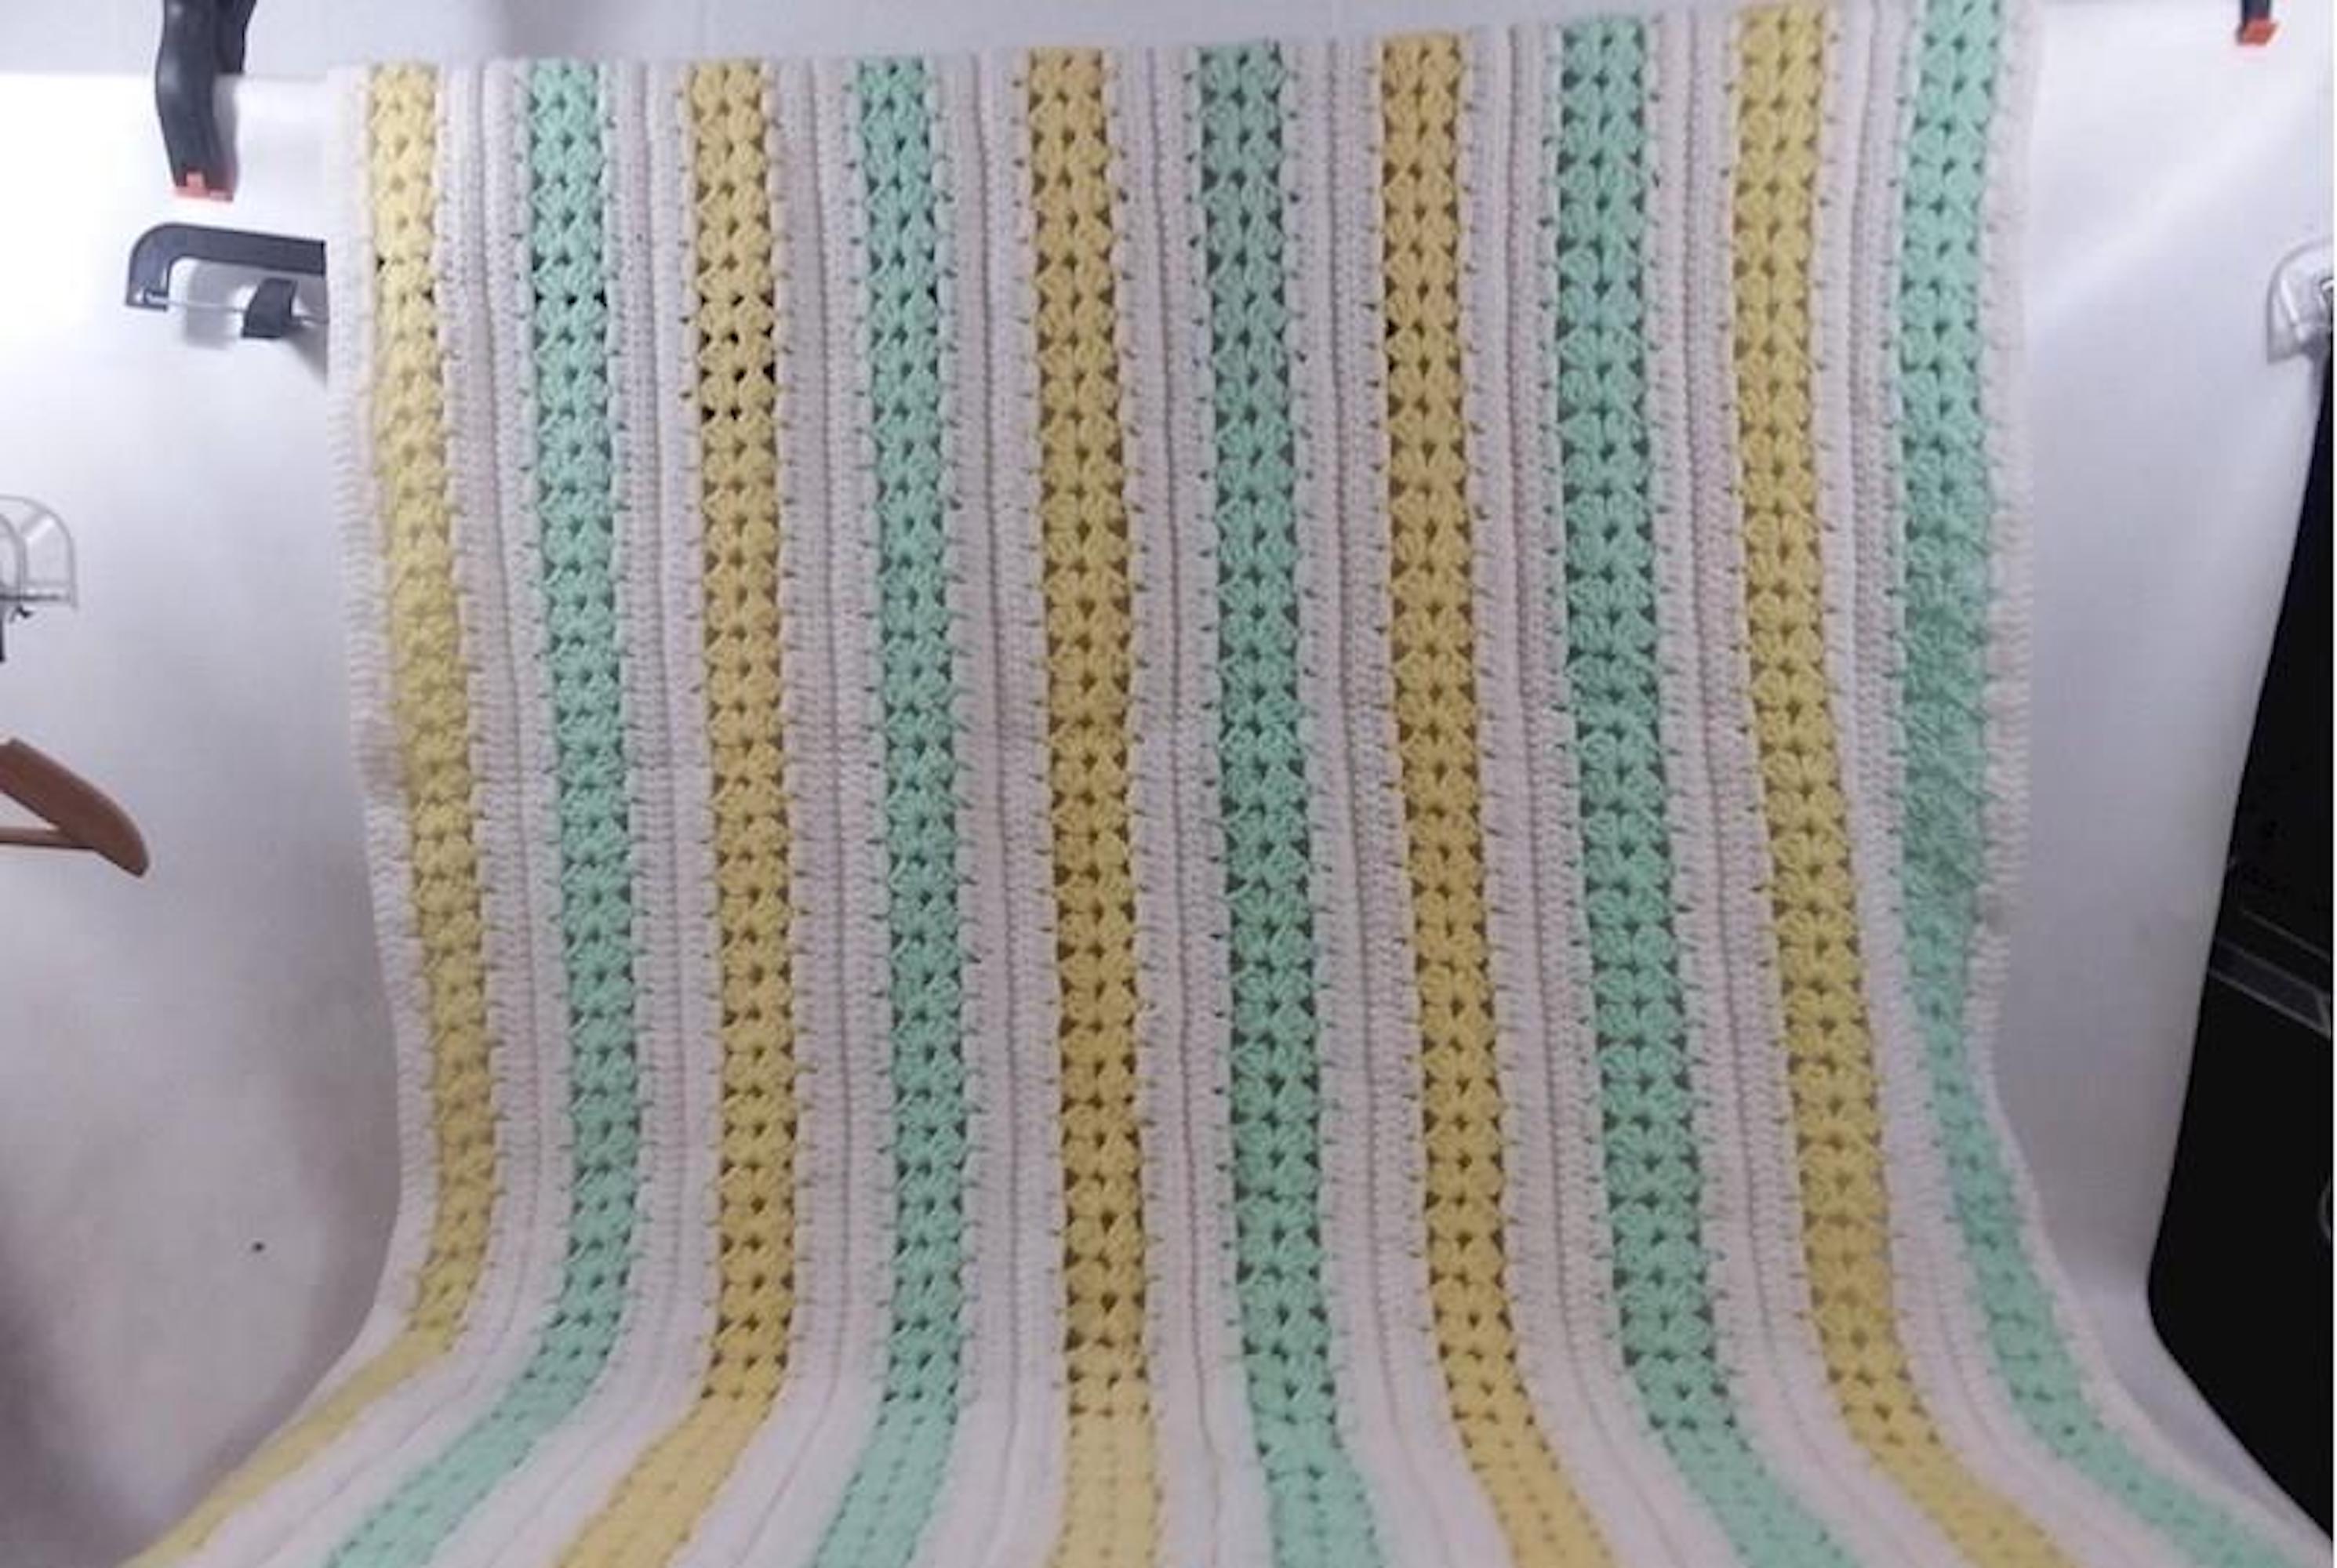 1997 Twin Yellow, Mint Green & White Hand-Knit Afghan Bedspread Coverlet (48” x 72”)